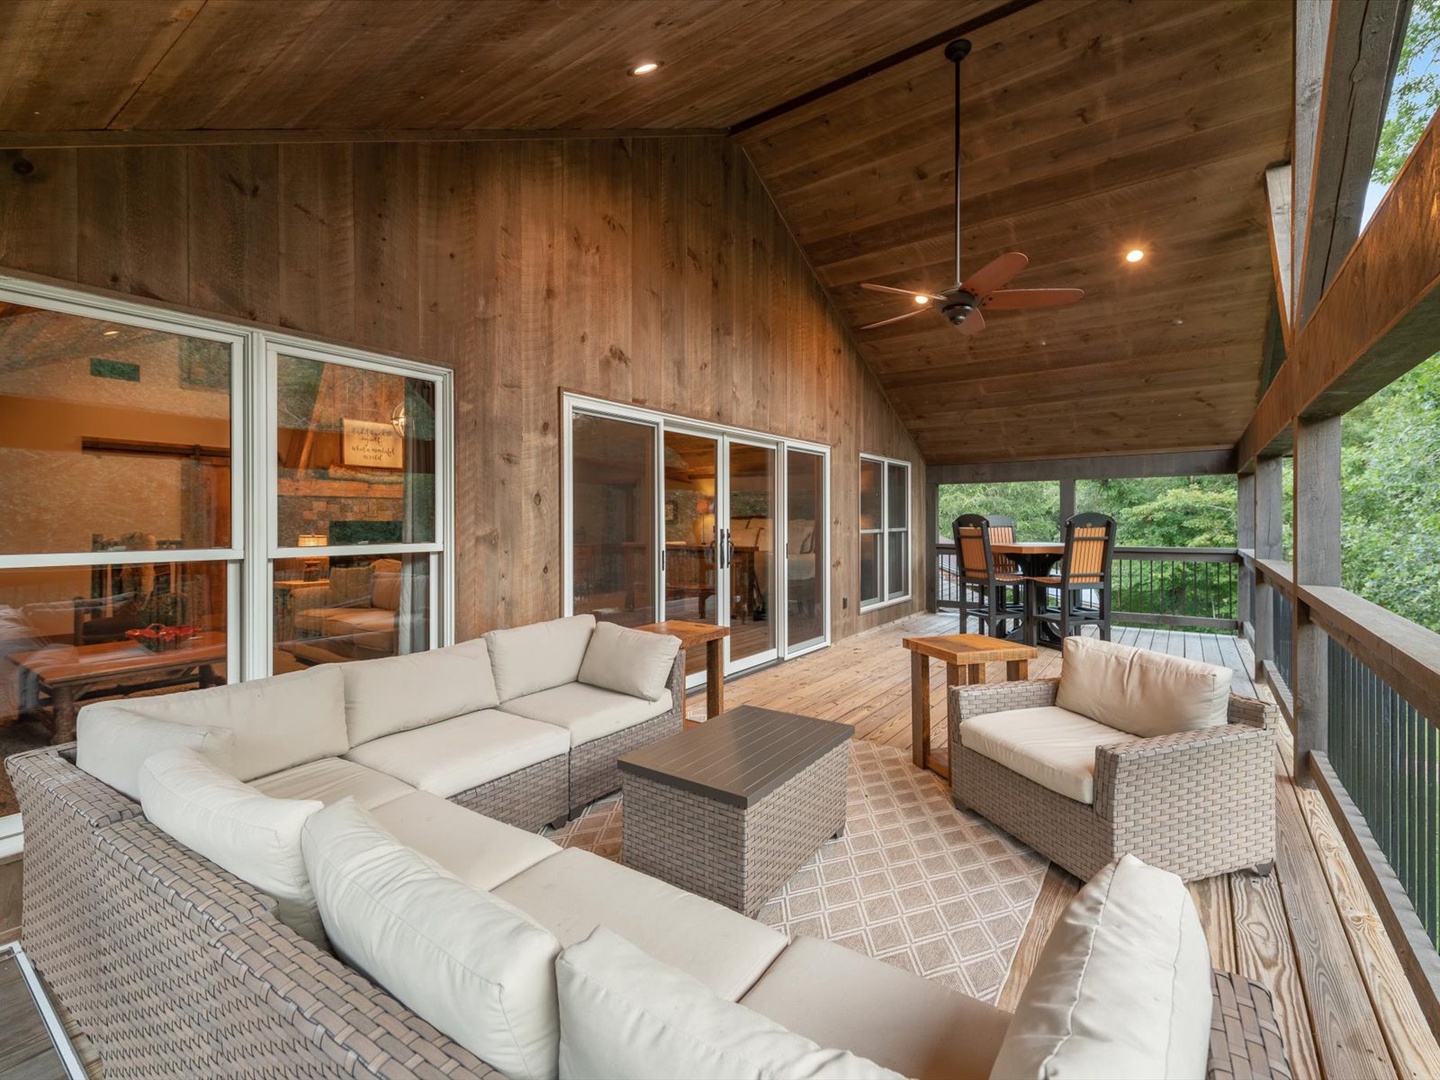 The River House- Upper level deck seating space